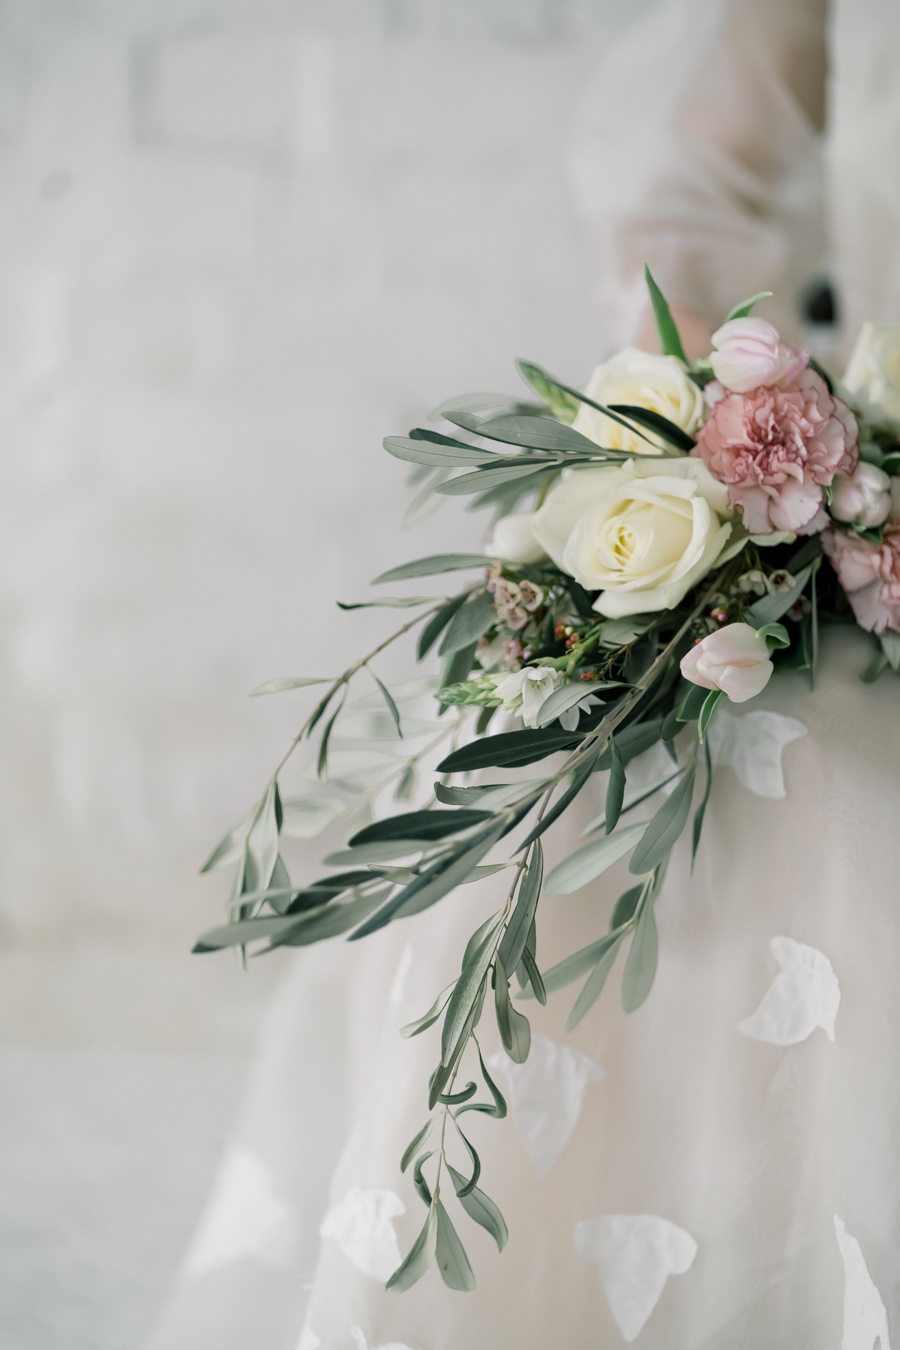 Spring blossom wedding style inspiration and ideas with Chloe Ely Photography at Barton Court (26)